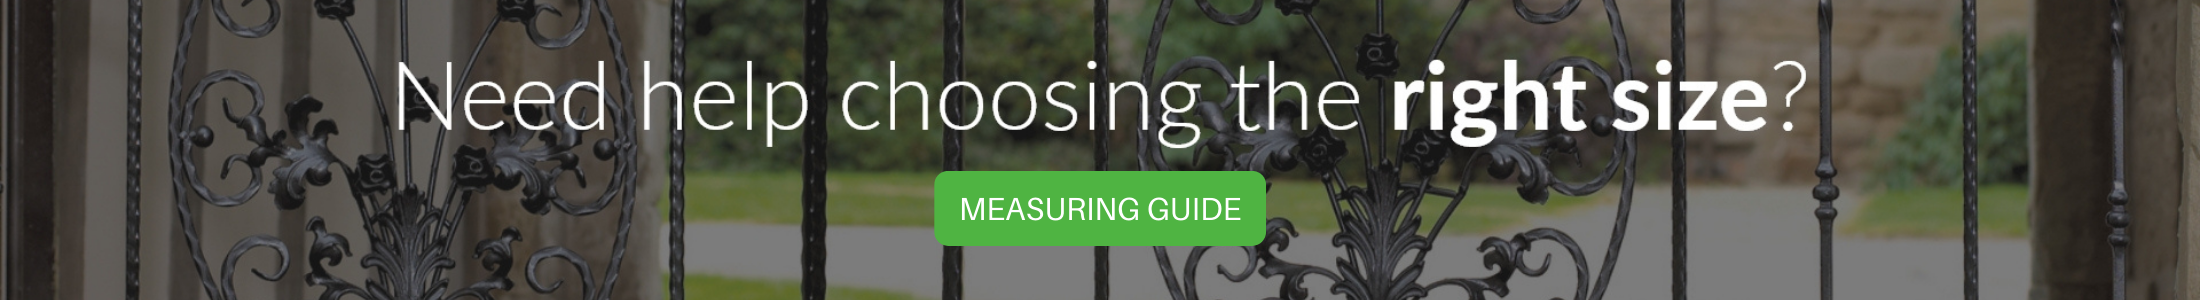 Discover more about ordering sizes by navigating to the measuring guide